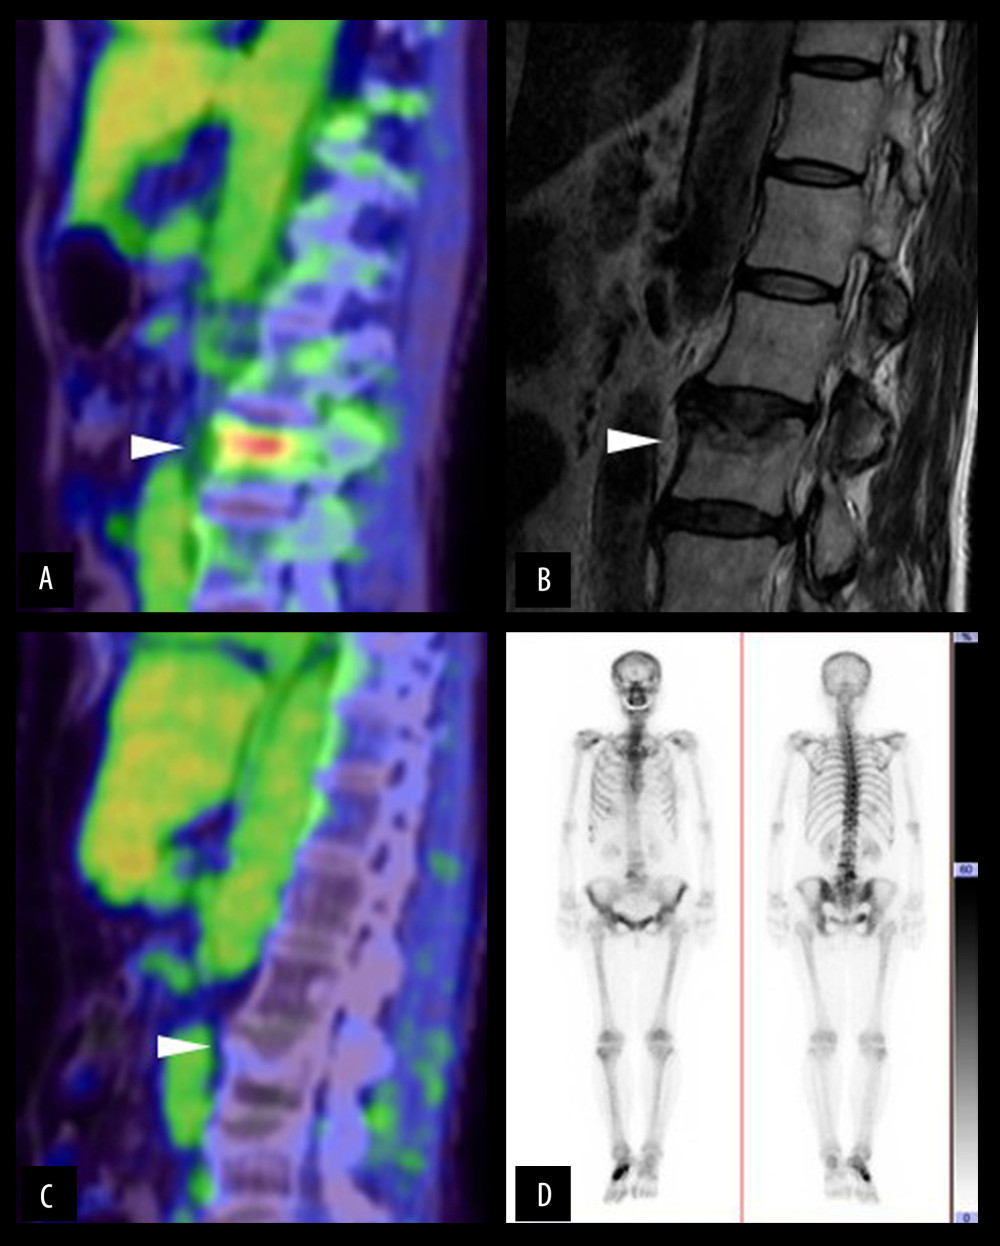 Changes in bone metastasis on 18F-FDG-PET/CT imaging, magnetic resonance imaging (MRI), and bone scintigraphy. 18F-FDG-PET/CT (A) and MRI (B) revealed bone metastasis in the 3rd lumbar vertebra (white arrowhead) in December 2014. Three years and 10 months later, 18F-FDG-PET/CT (C) showed no abnormal accumulation in the 3rd lumbar vertebra (white arrowhead). Bone scintigraphy in June 2019 showed no abnormal accumulation in the 3rd lumbar vertebra and no other bone metastases (D).